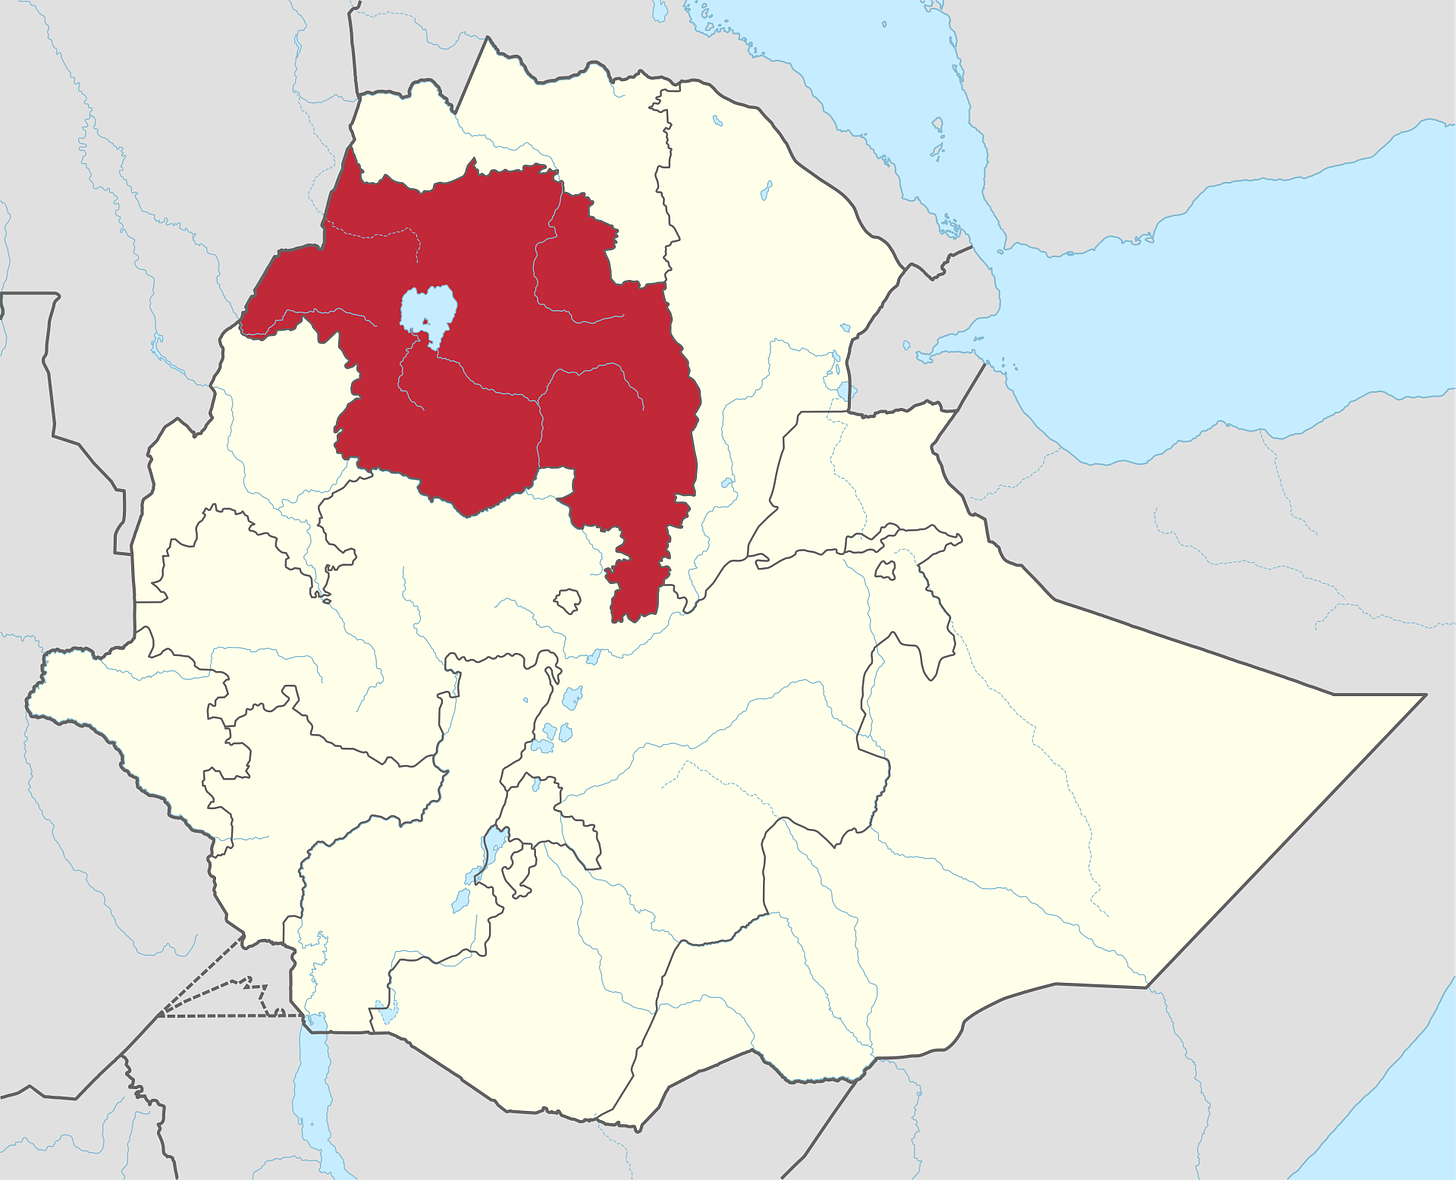 Map of Ethiopia showing the Amhara Region